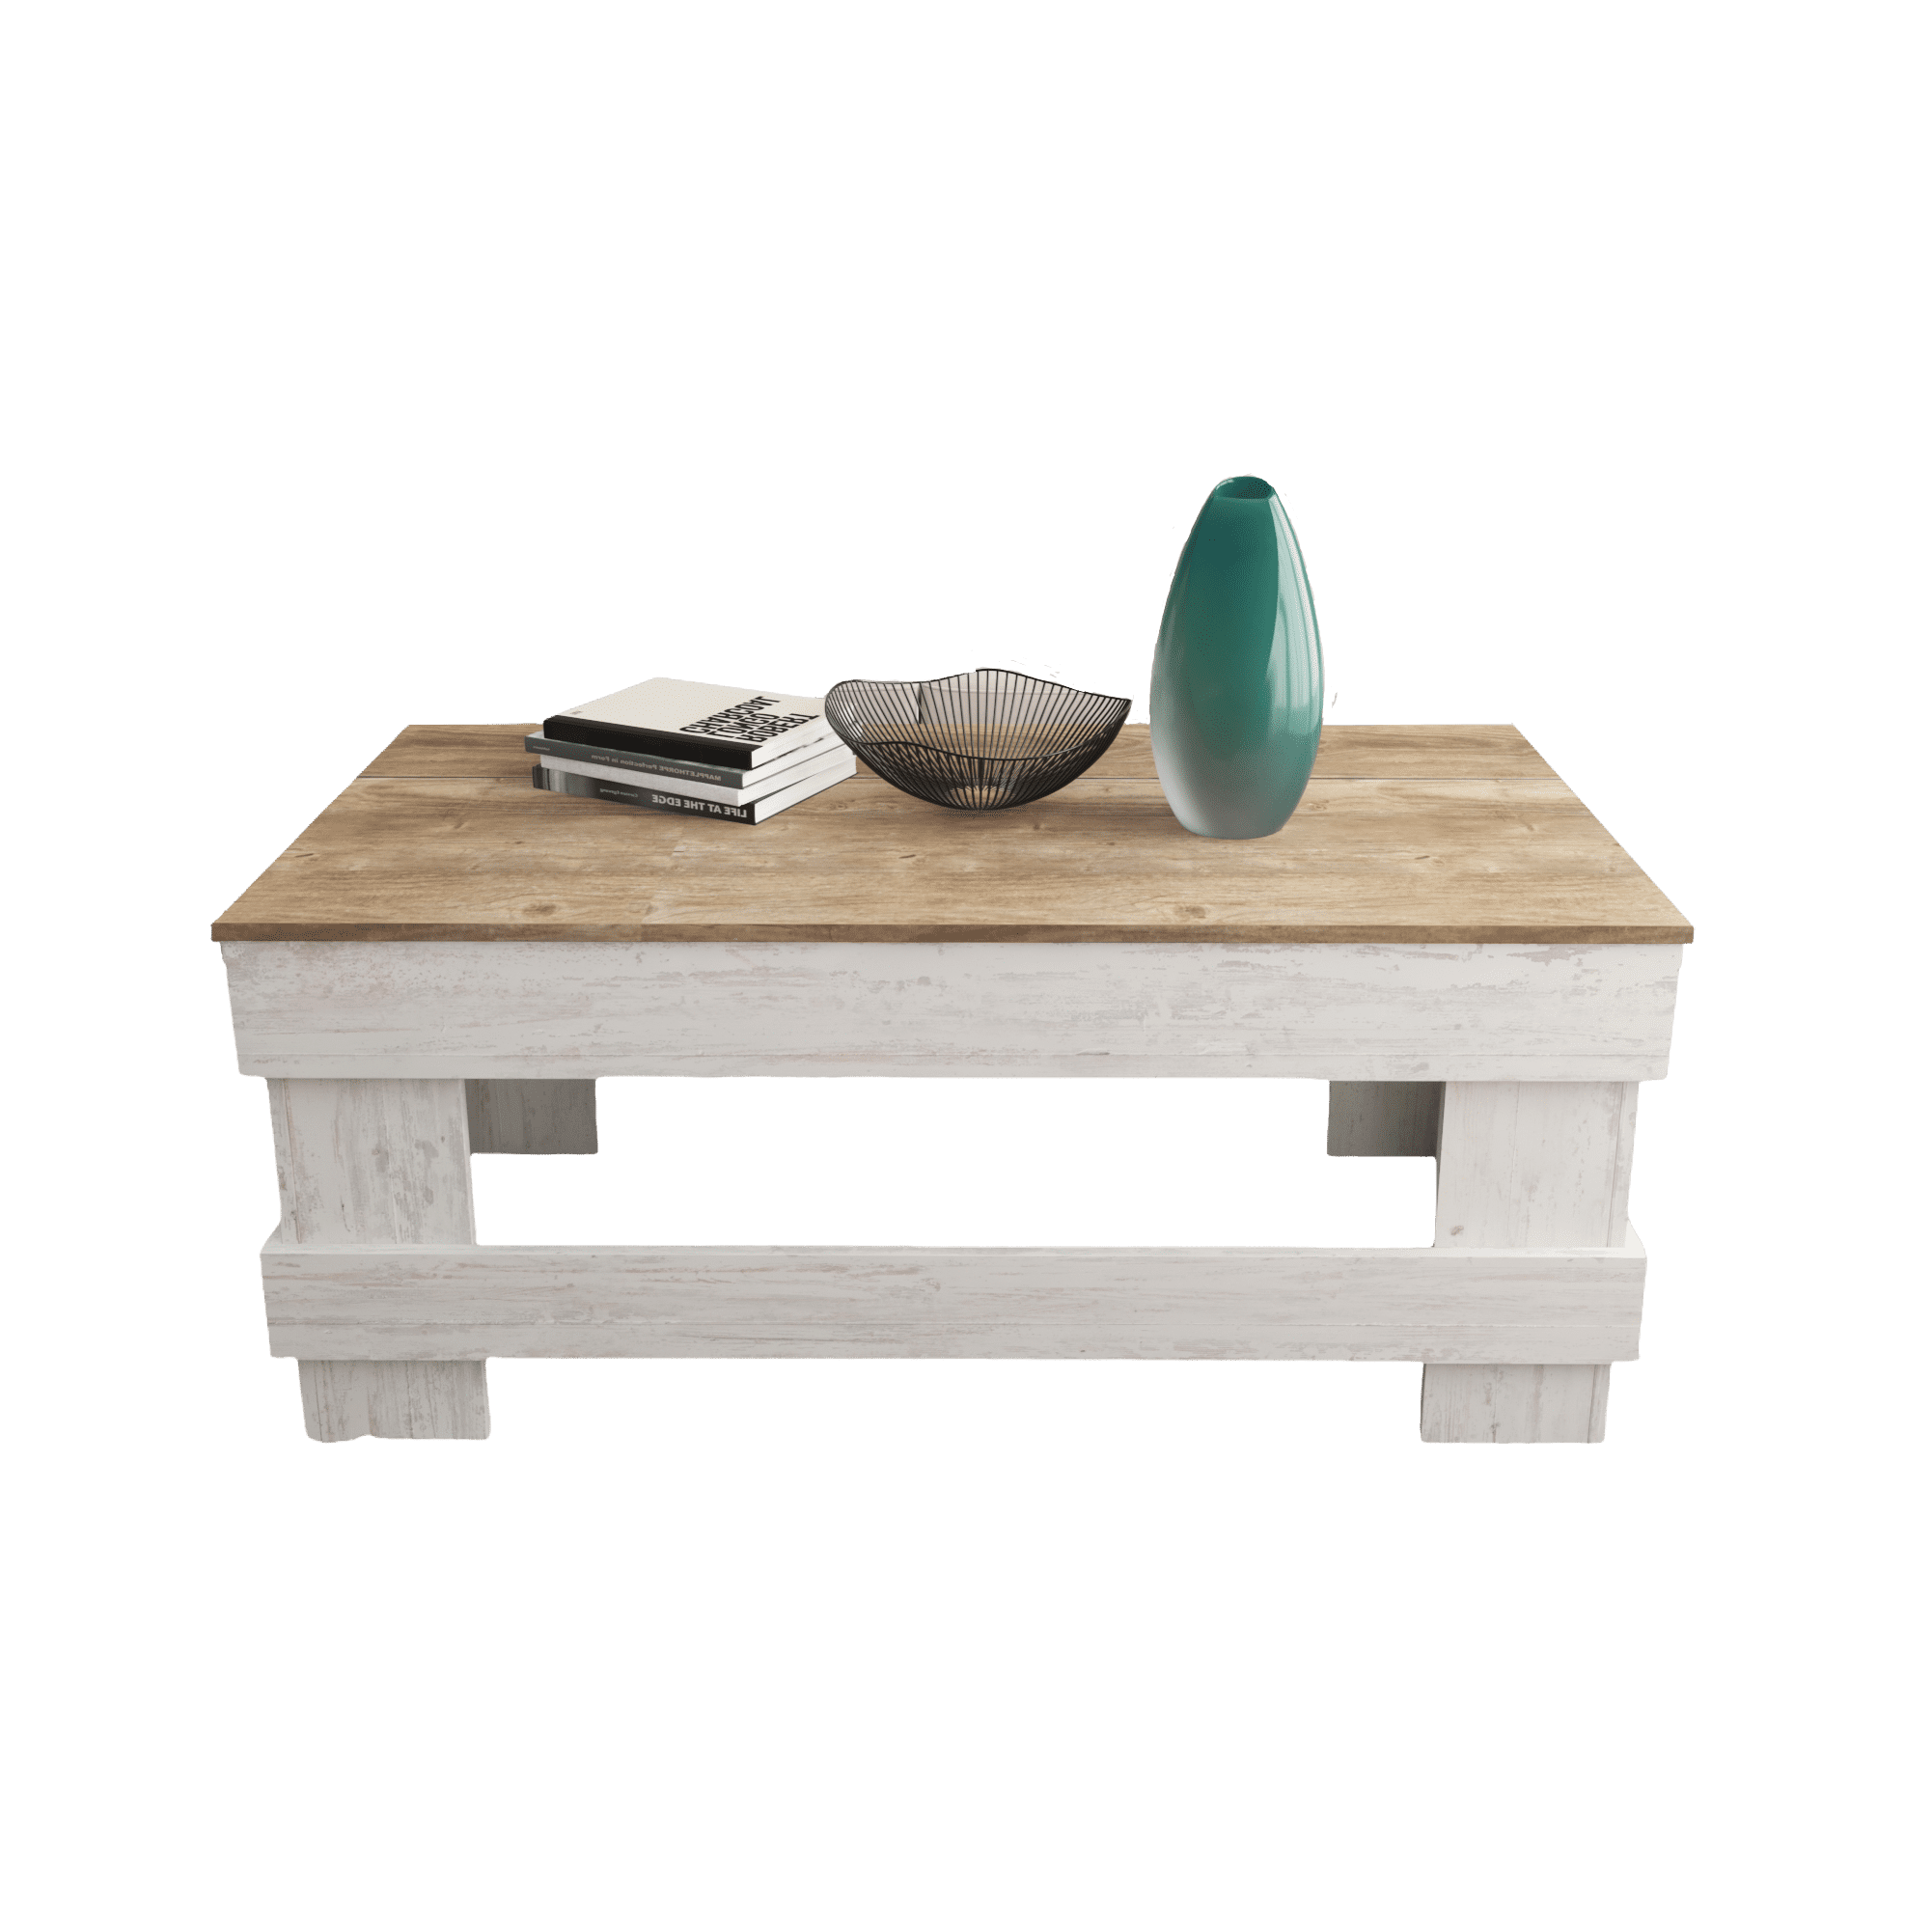 Woven Paths Reclaimed Wood Coffee Table, Natural/white – Walmart Regarding Best And Newest Woven Paths Coffee Tables (Photo 1 of 10)